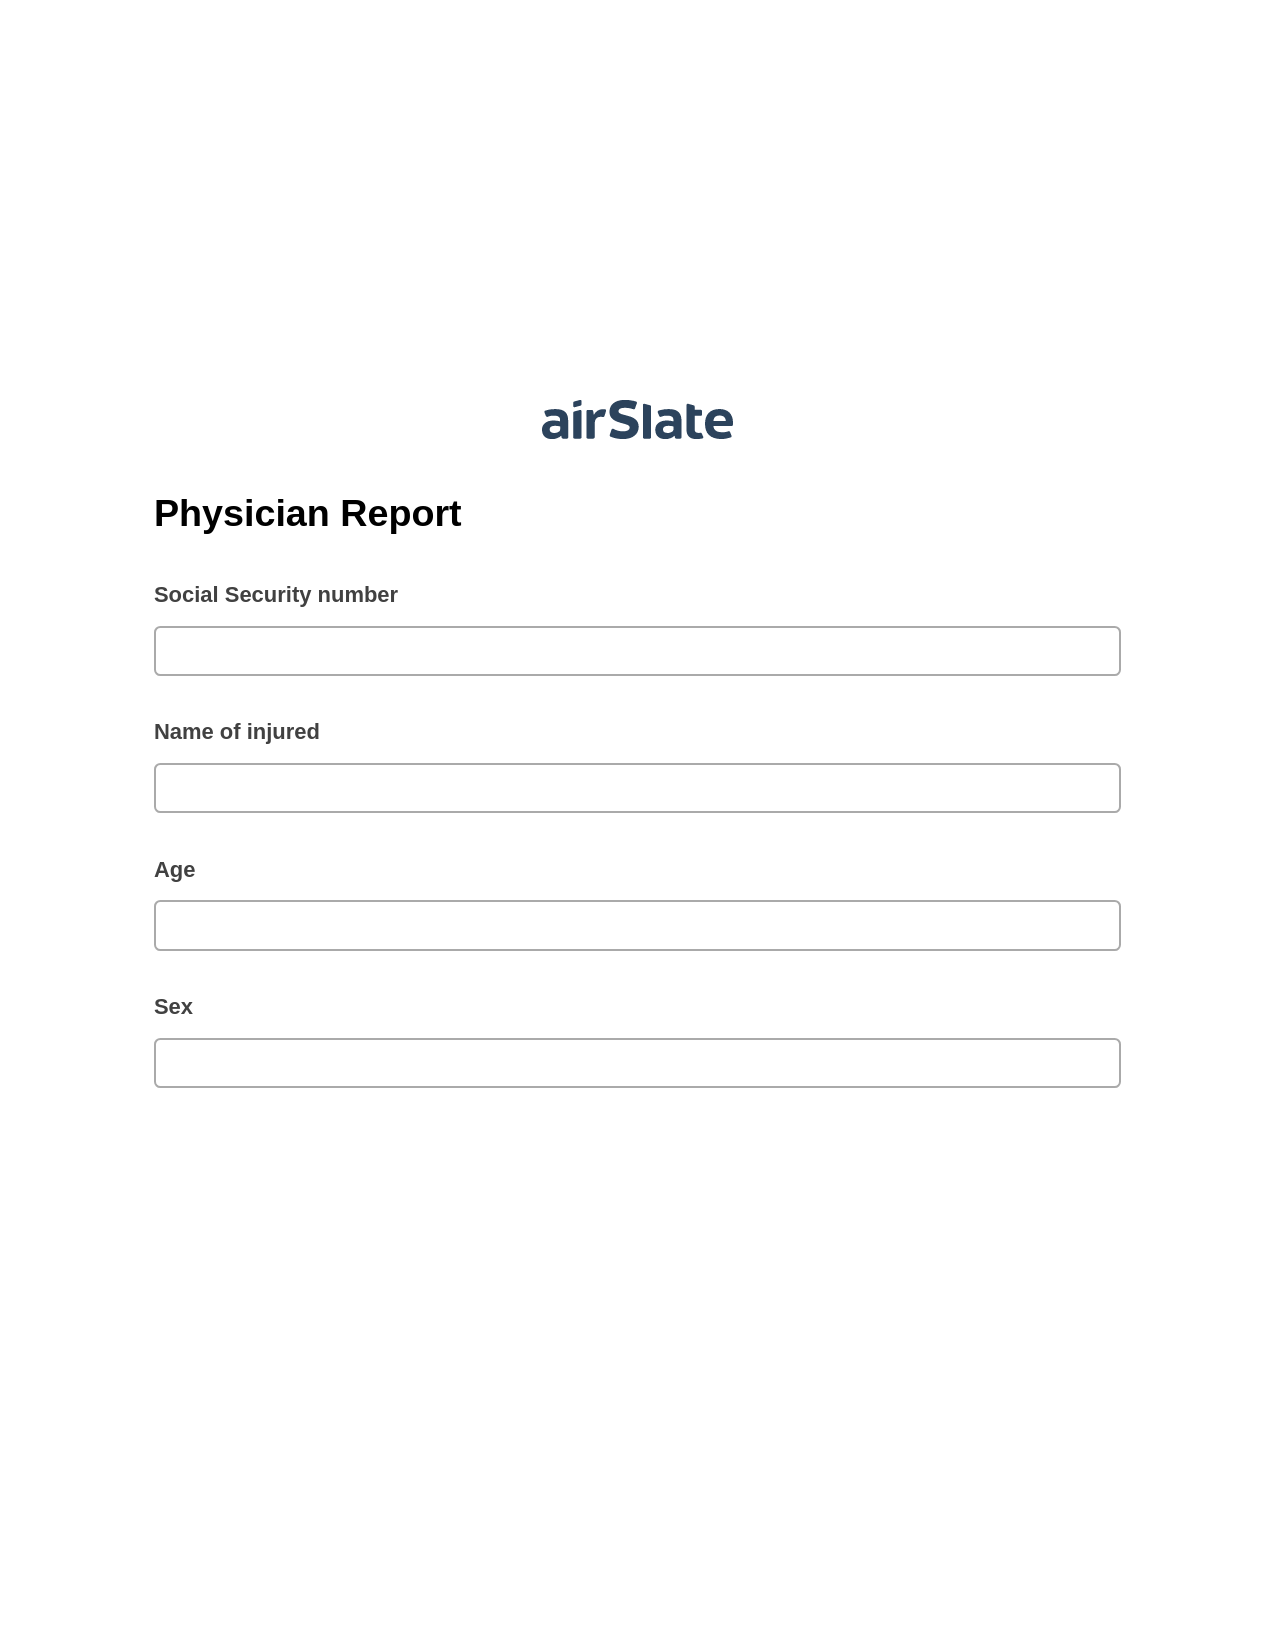 Physician Report Pre-fill from Salesforce Records Bot, Unassign Role Bot, Export to Salesforce Record Bot